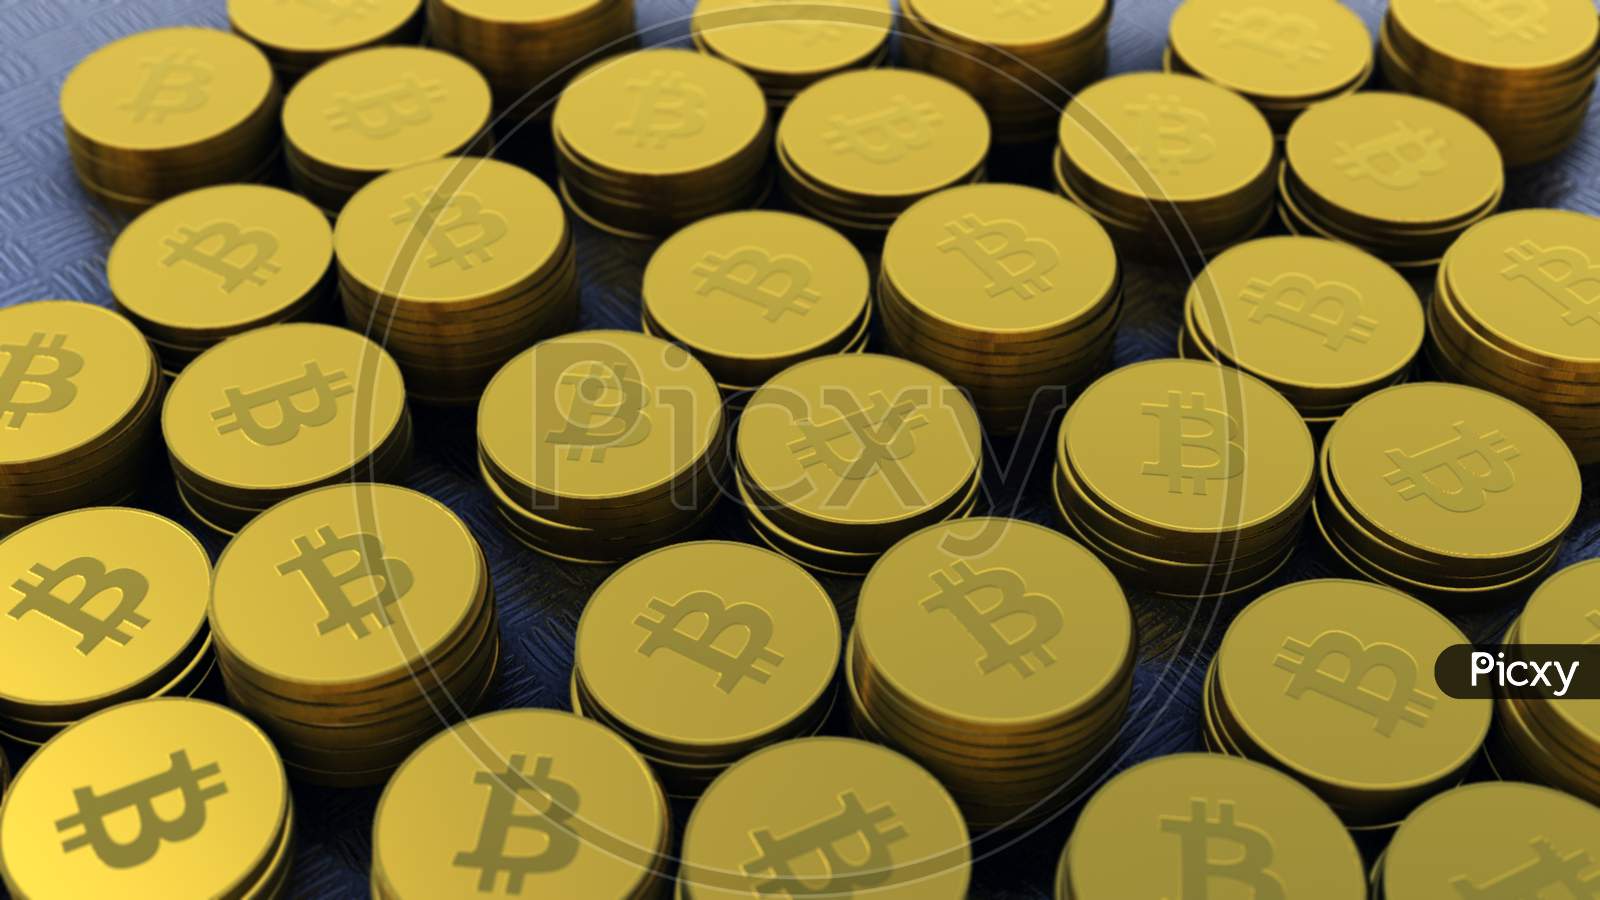 Gold Colored Bitcoins ,Crypto Currency, Bit Coin.Btc Currency, Business And Technology Concept, 4K High Quality .